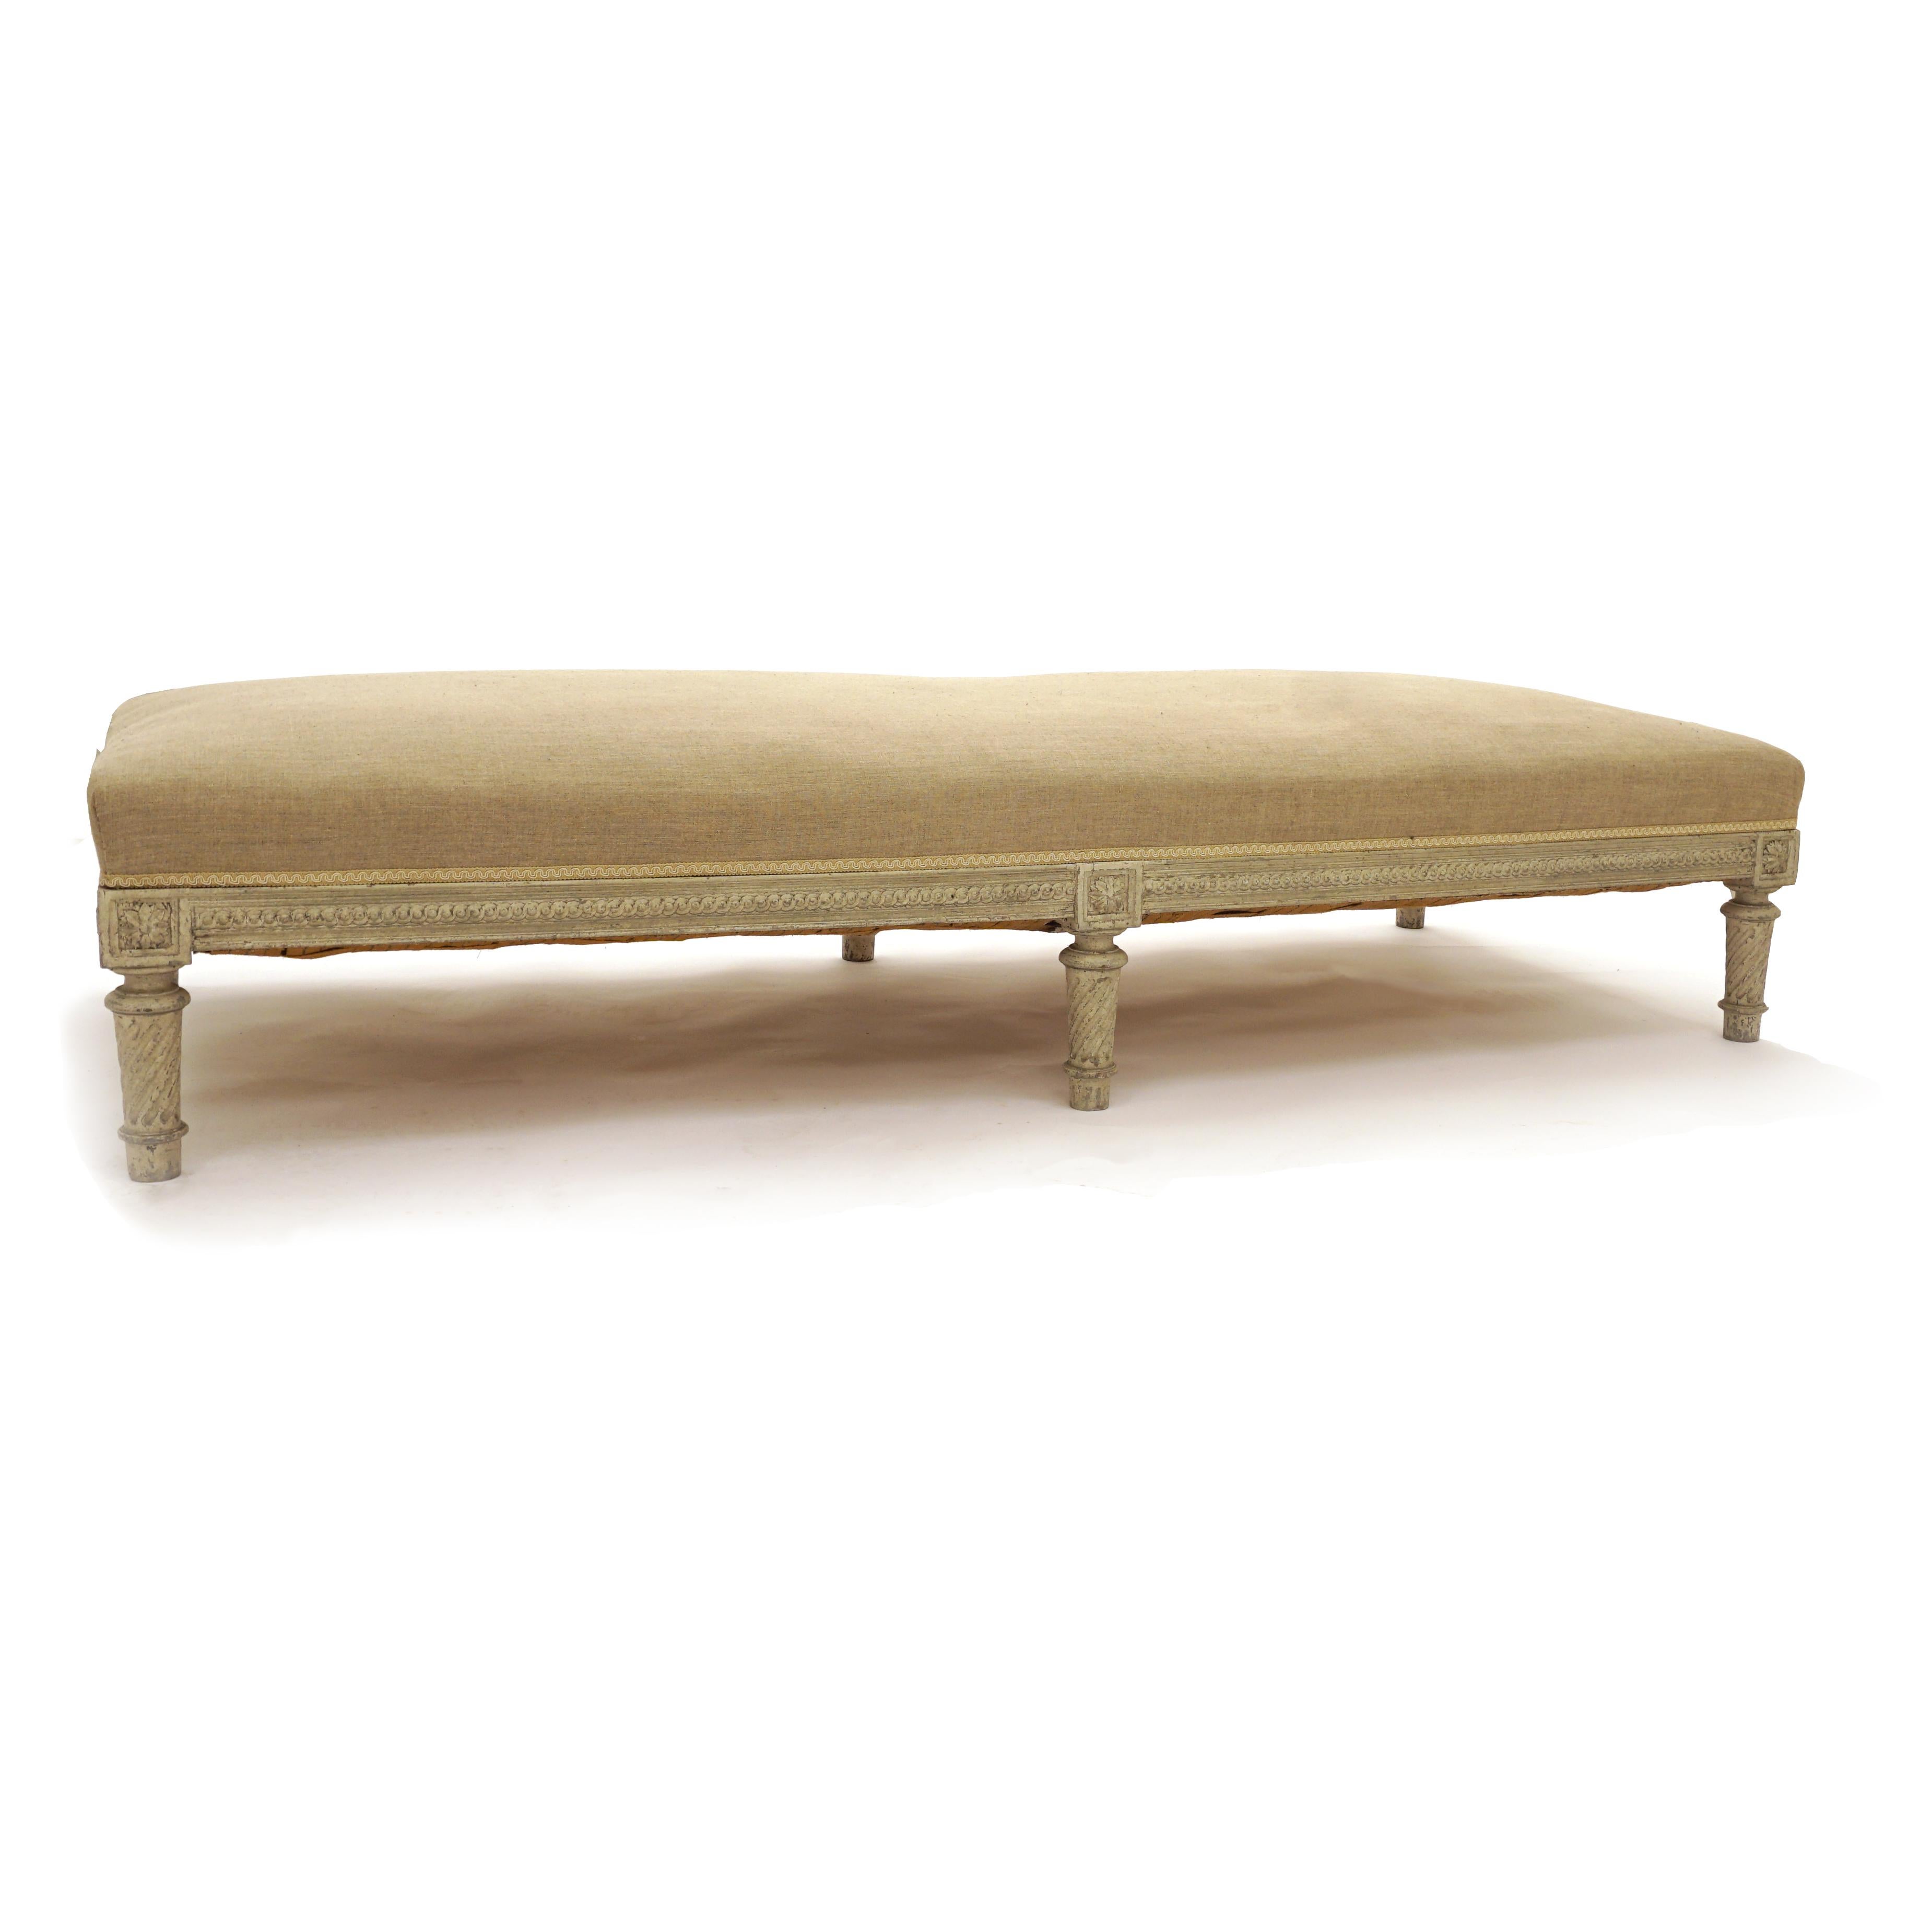 Gustavian style daybed in grey/white colors
Sweden, circa 1860-80.
 